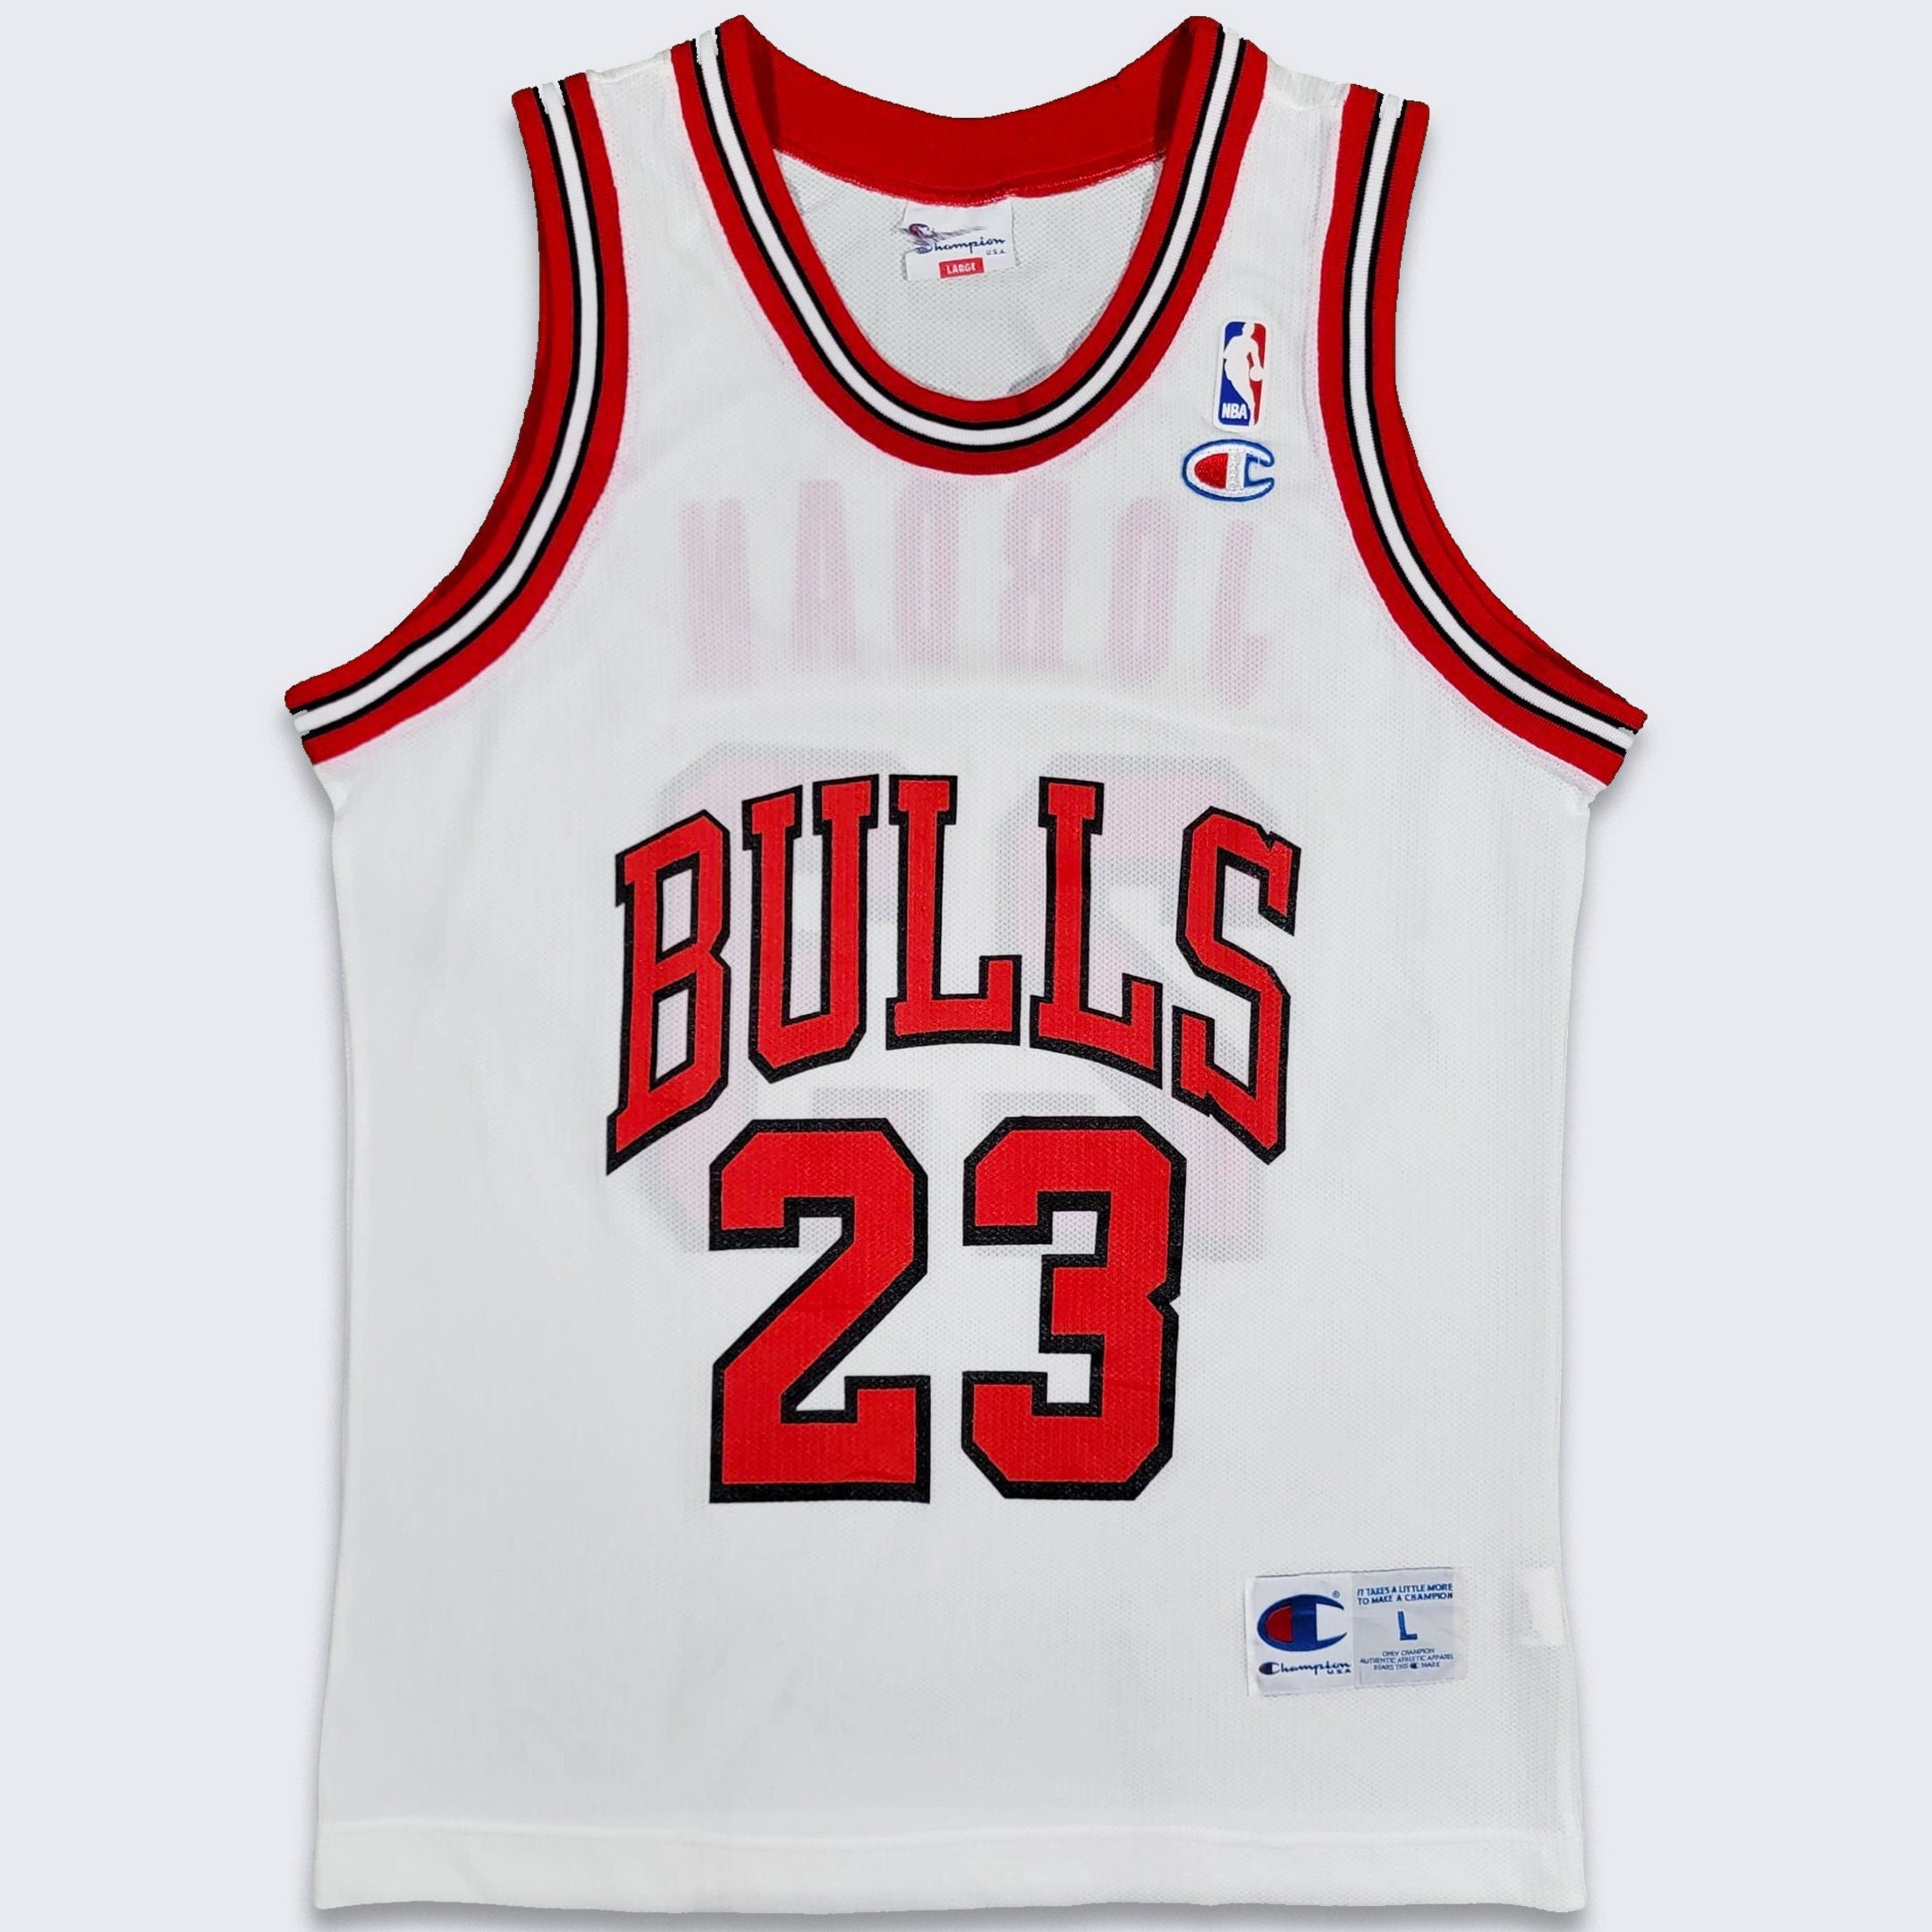 Mitchell & Ness Red Chicago Bulls snapback cap – SportJers